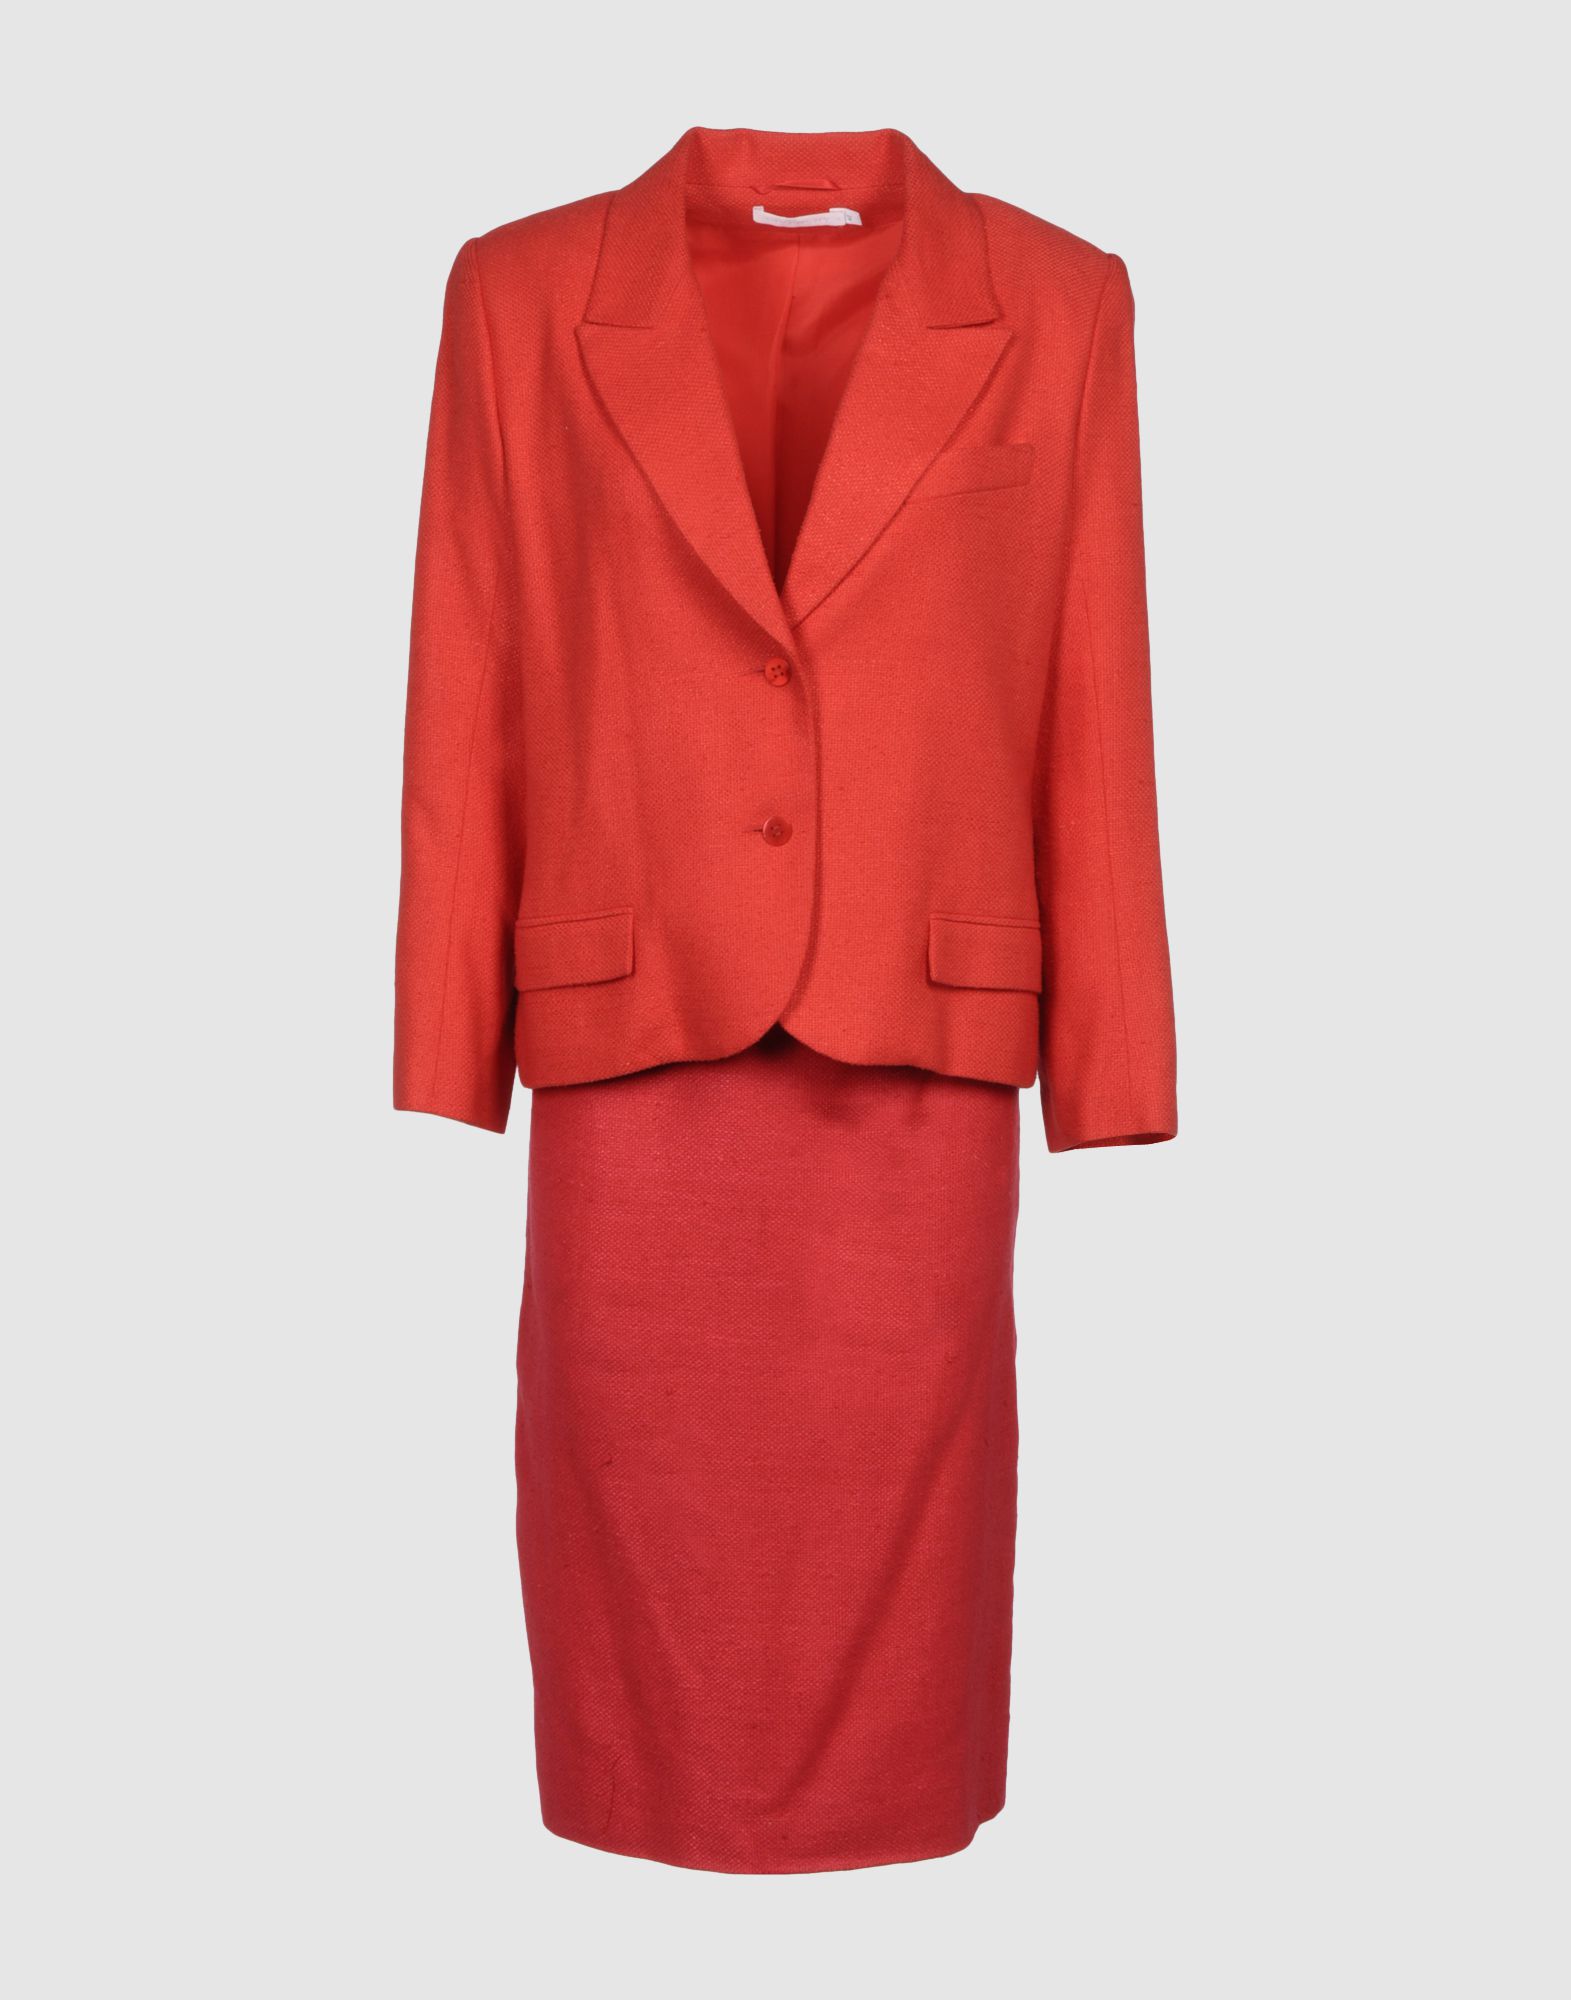 Givenchy Womens Suits in Red | Lyst